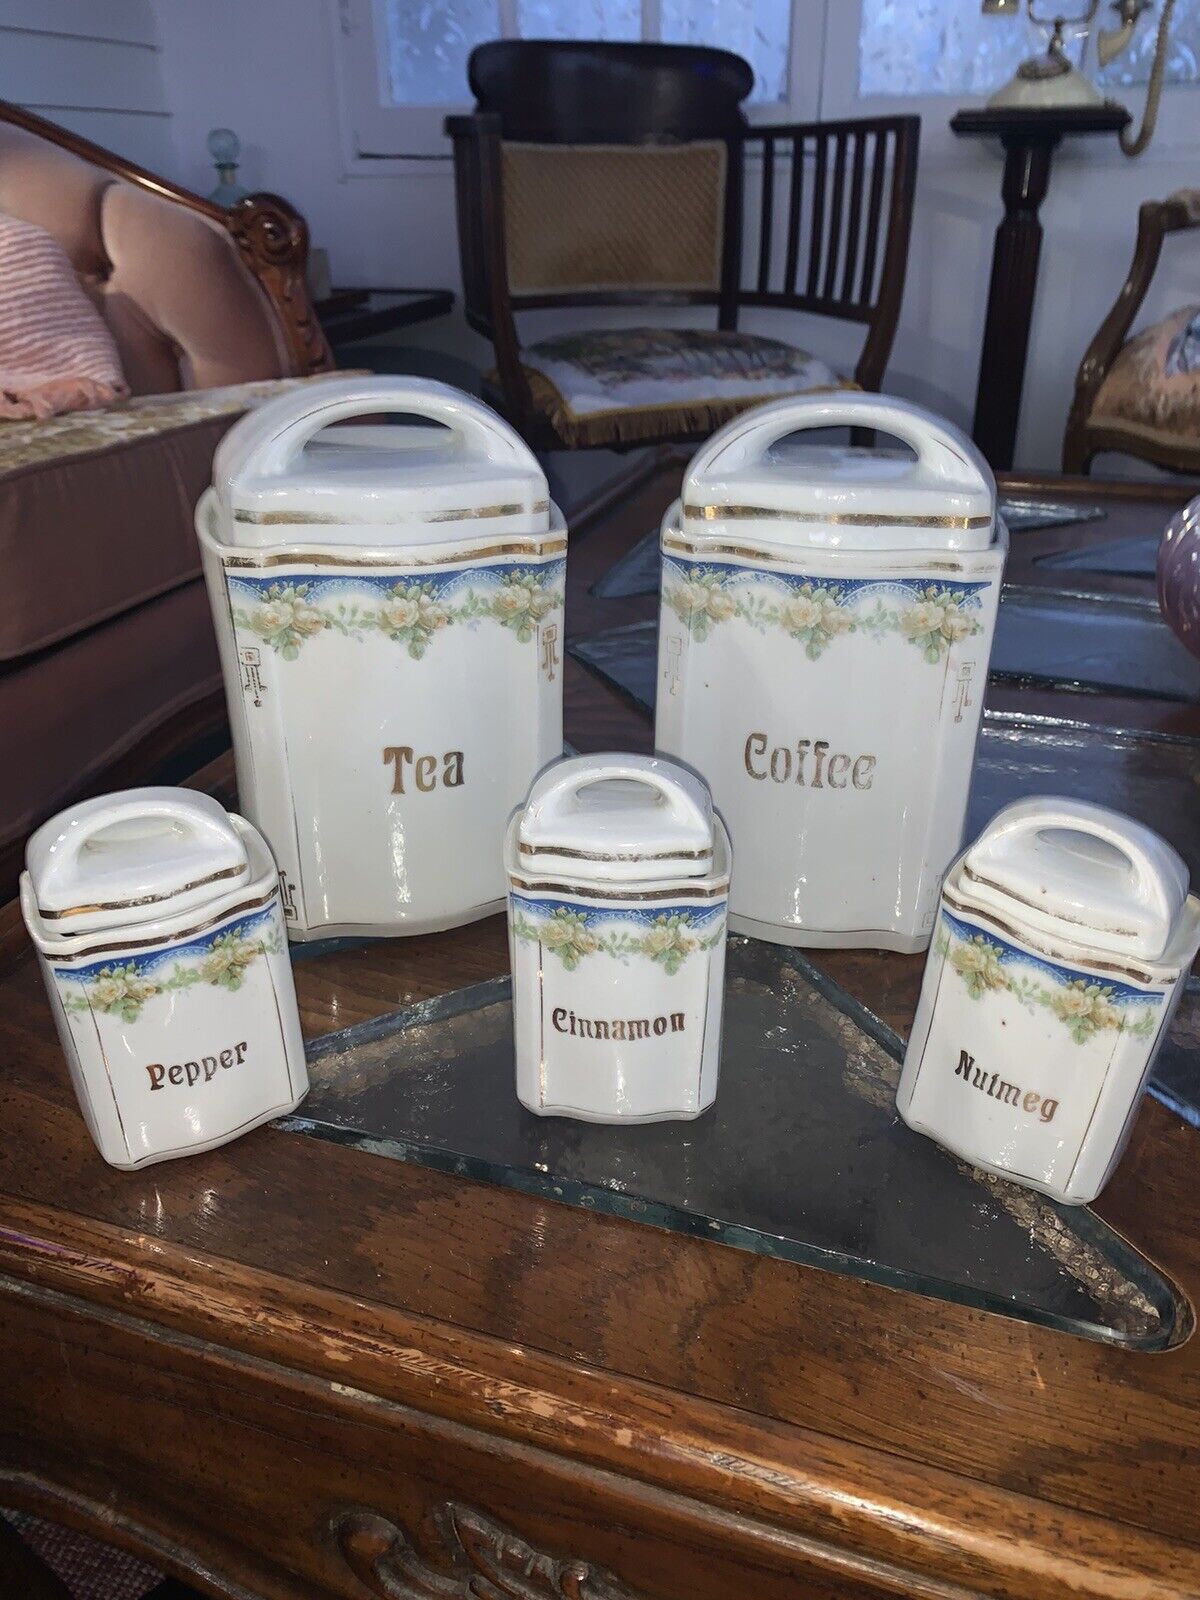 Vintage 1930s German Kitchen Canisters Spice Jars Coffee And Tea Containers